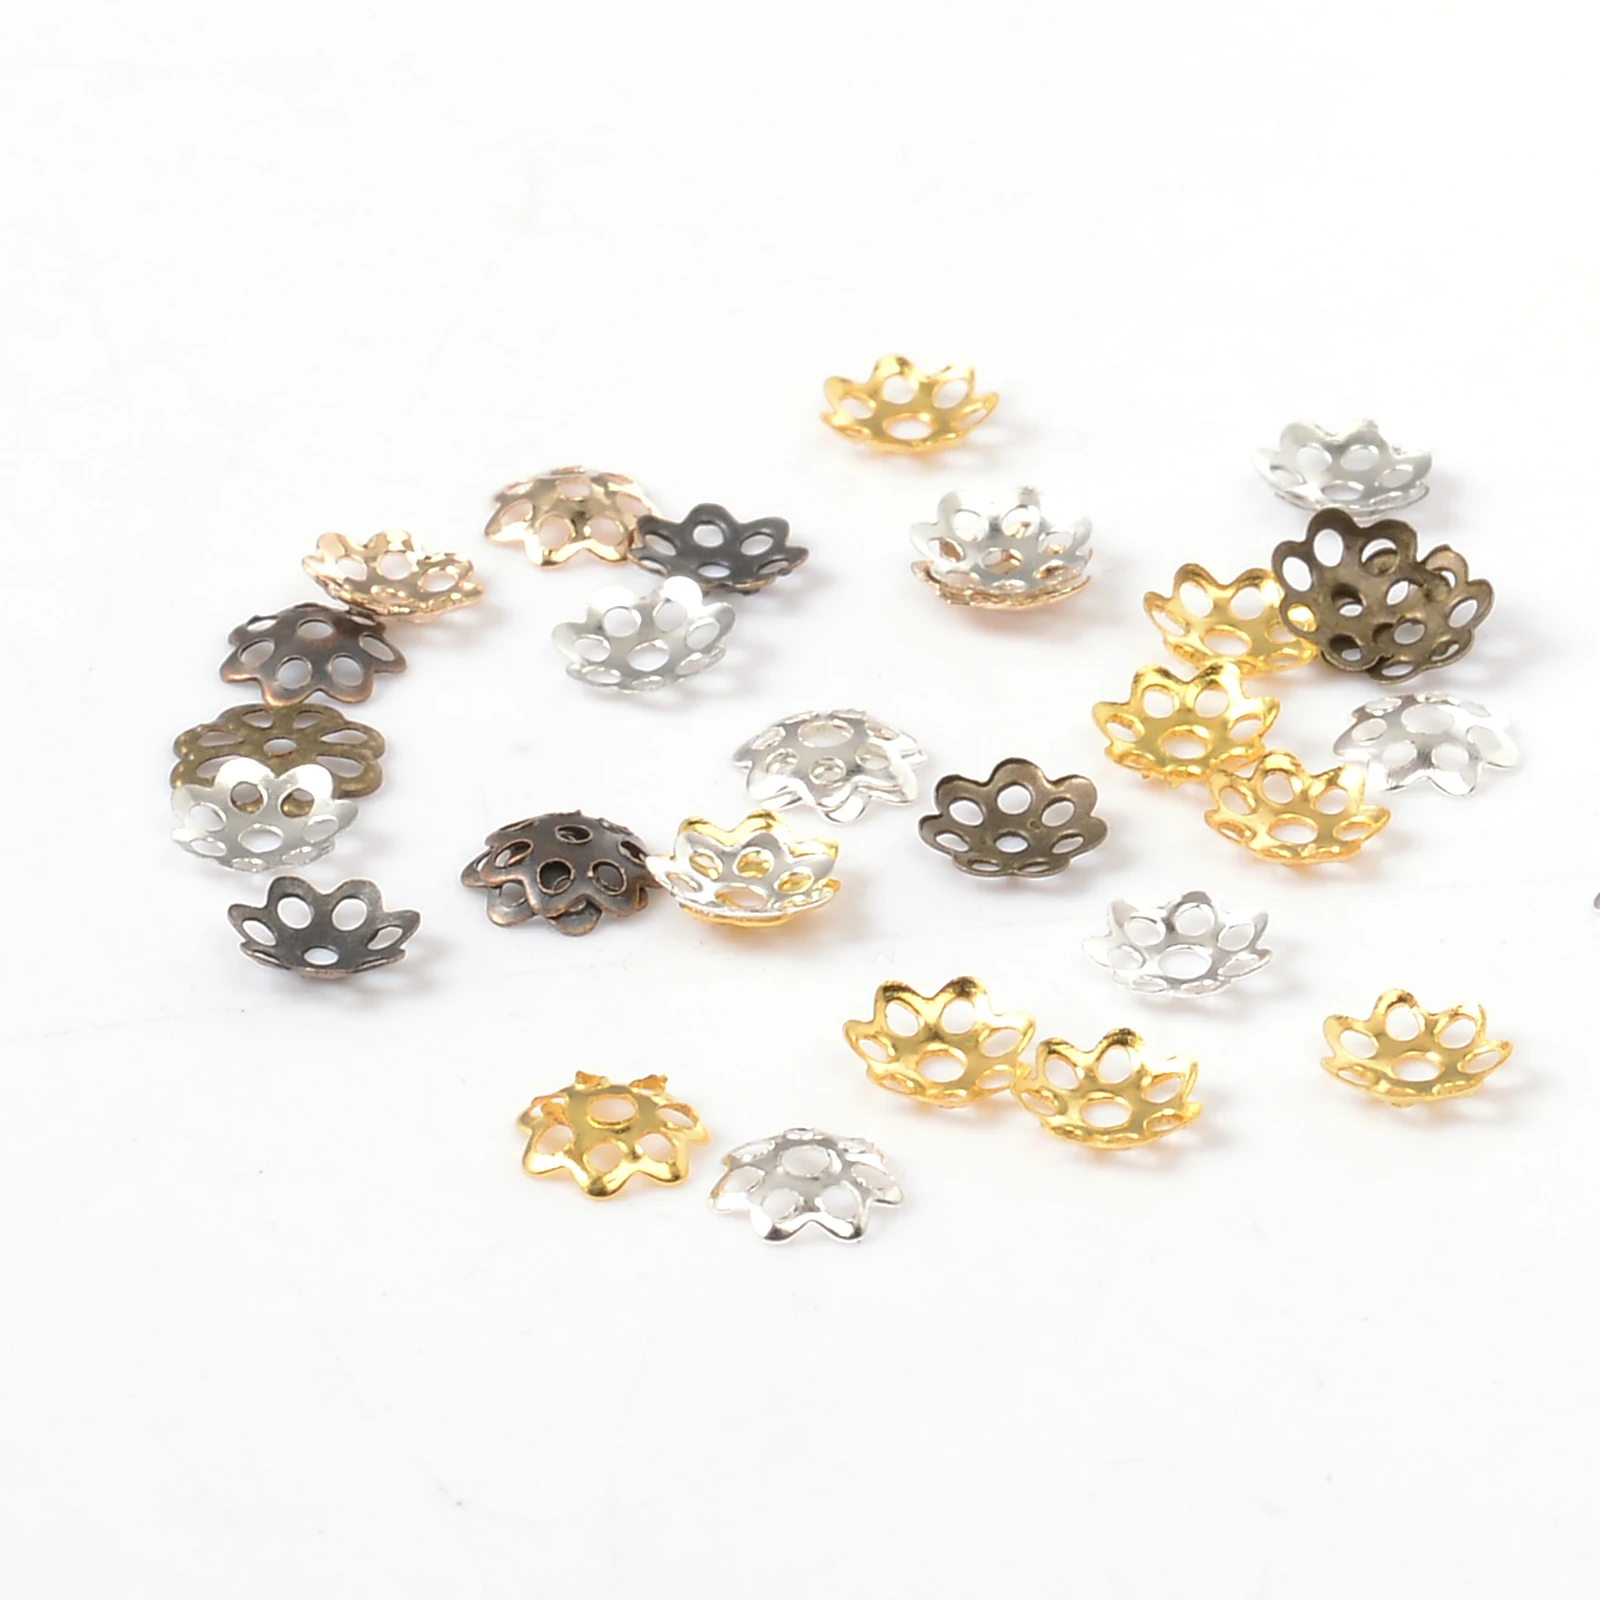 

500pcs 6mm Bronze Flower Petal Beads Caps Bulk End Spacer Charms Bead Caps For Jewelry Making Accessories DIY Supplies